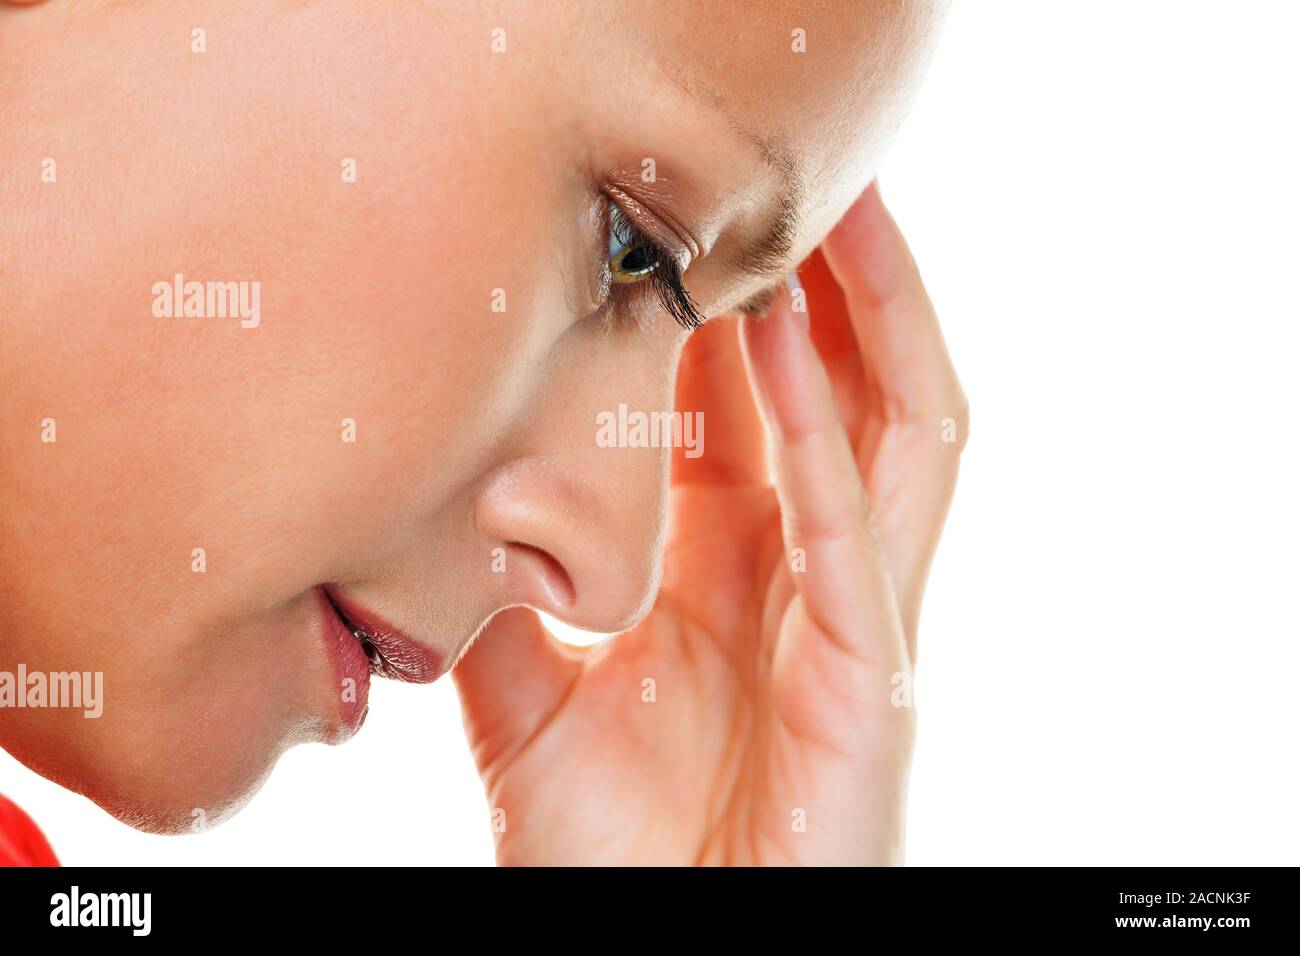 Thoughtful woman with headaches Stock Photo